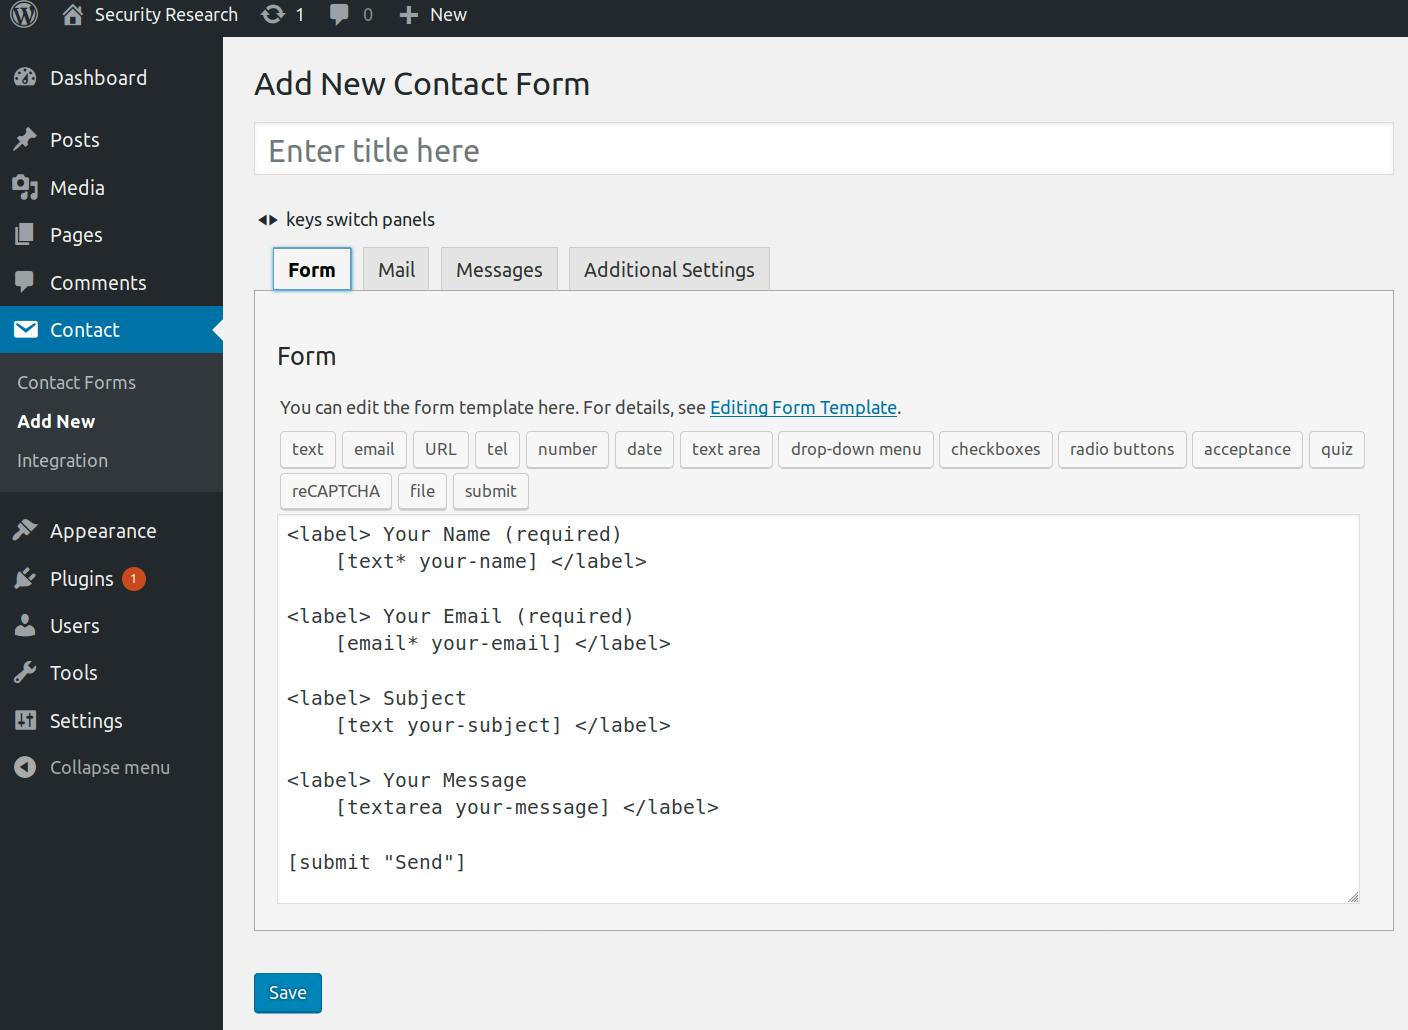 Editor page for Contact Form that can be accessed by administrators.